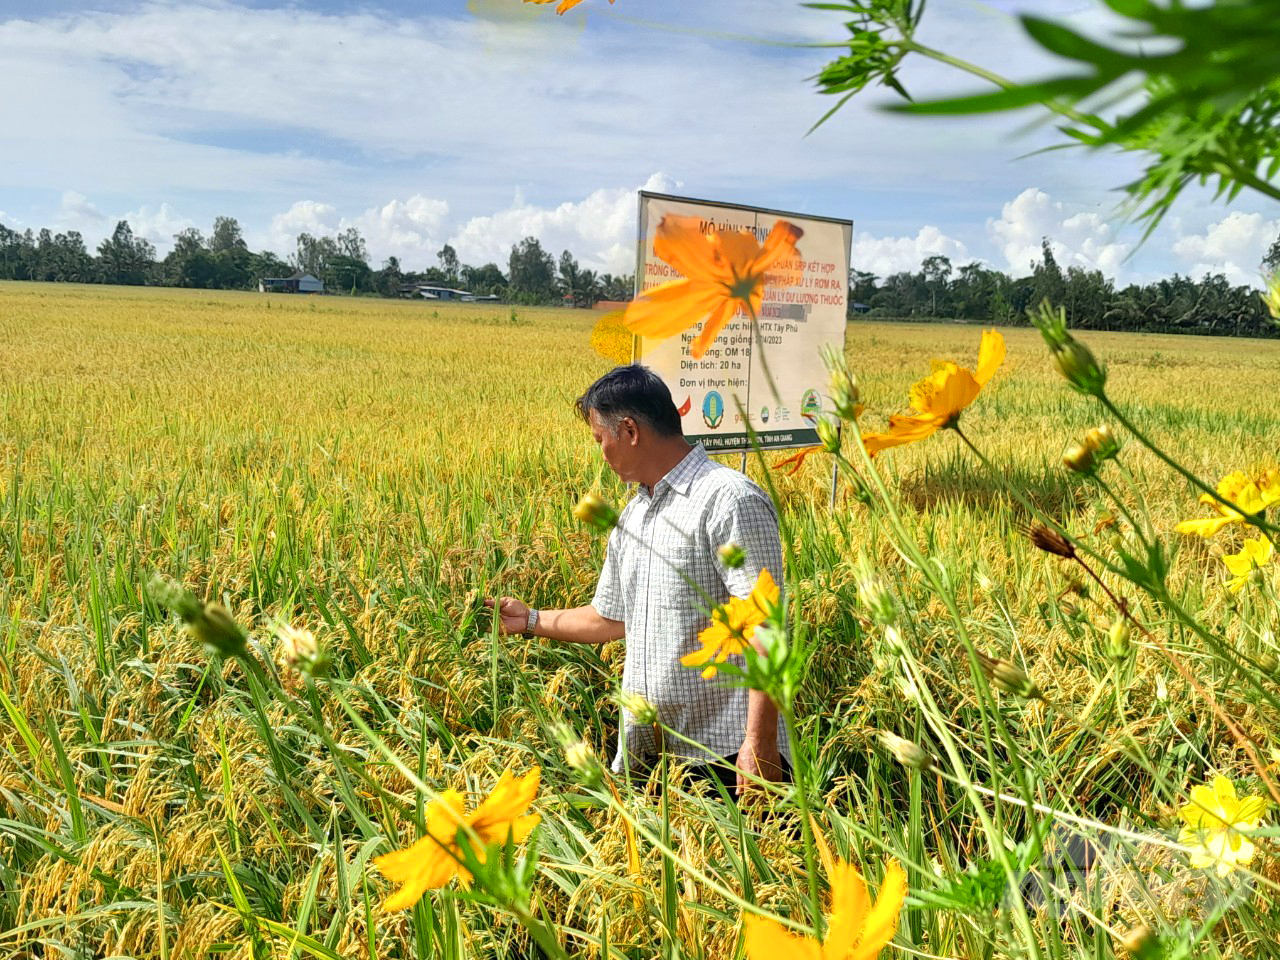 The technological advancements applied in sustainable rice production and the 'flower-bordered rice fields' model serve as a crucial foundation for the implementation of the Integrated Pest and Health Management program. This program focuses on the comprehensive management of plant health and pest control in agriculture. Photo: Le Hoang Vu.